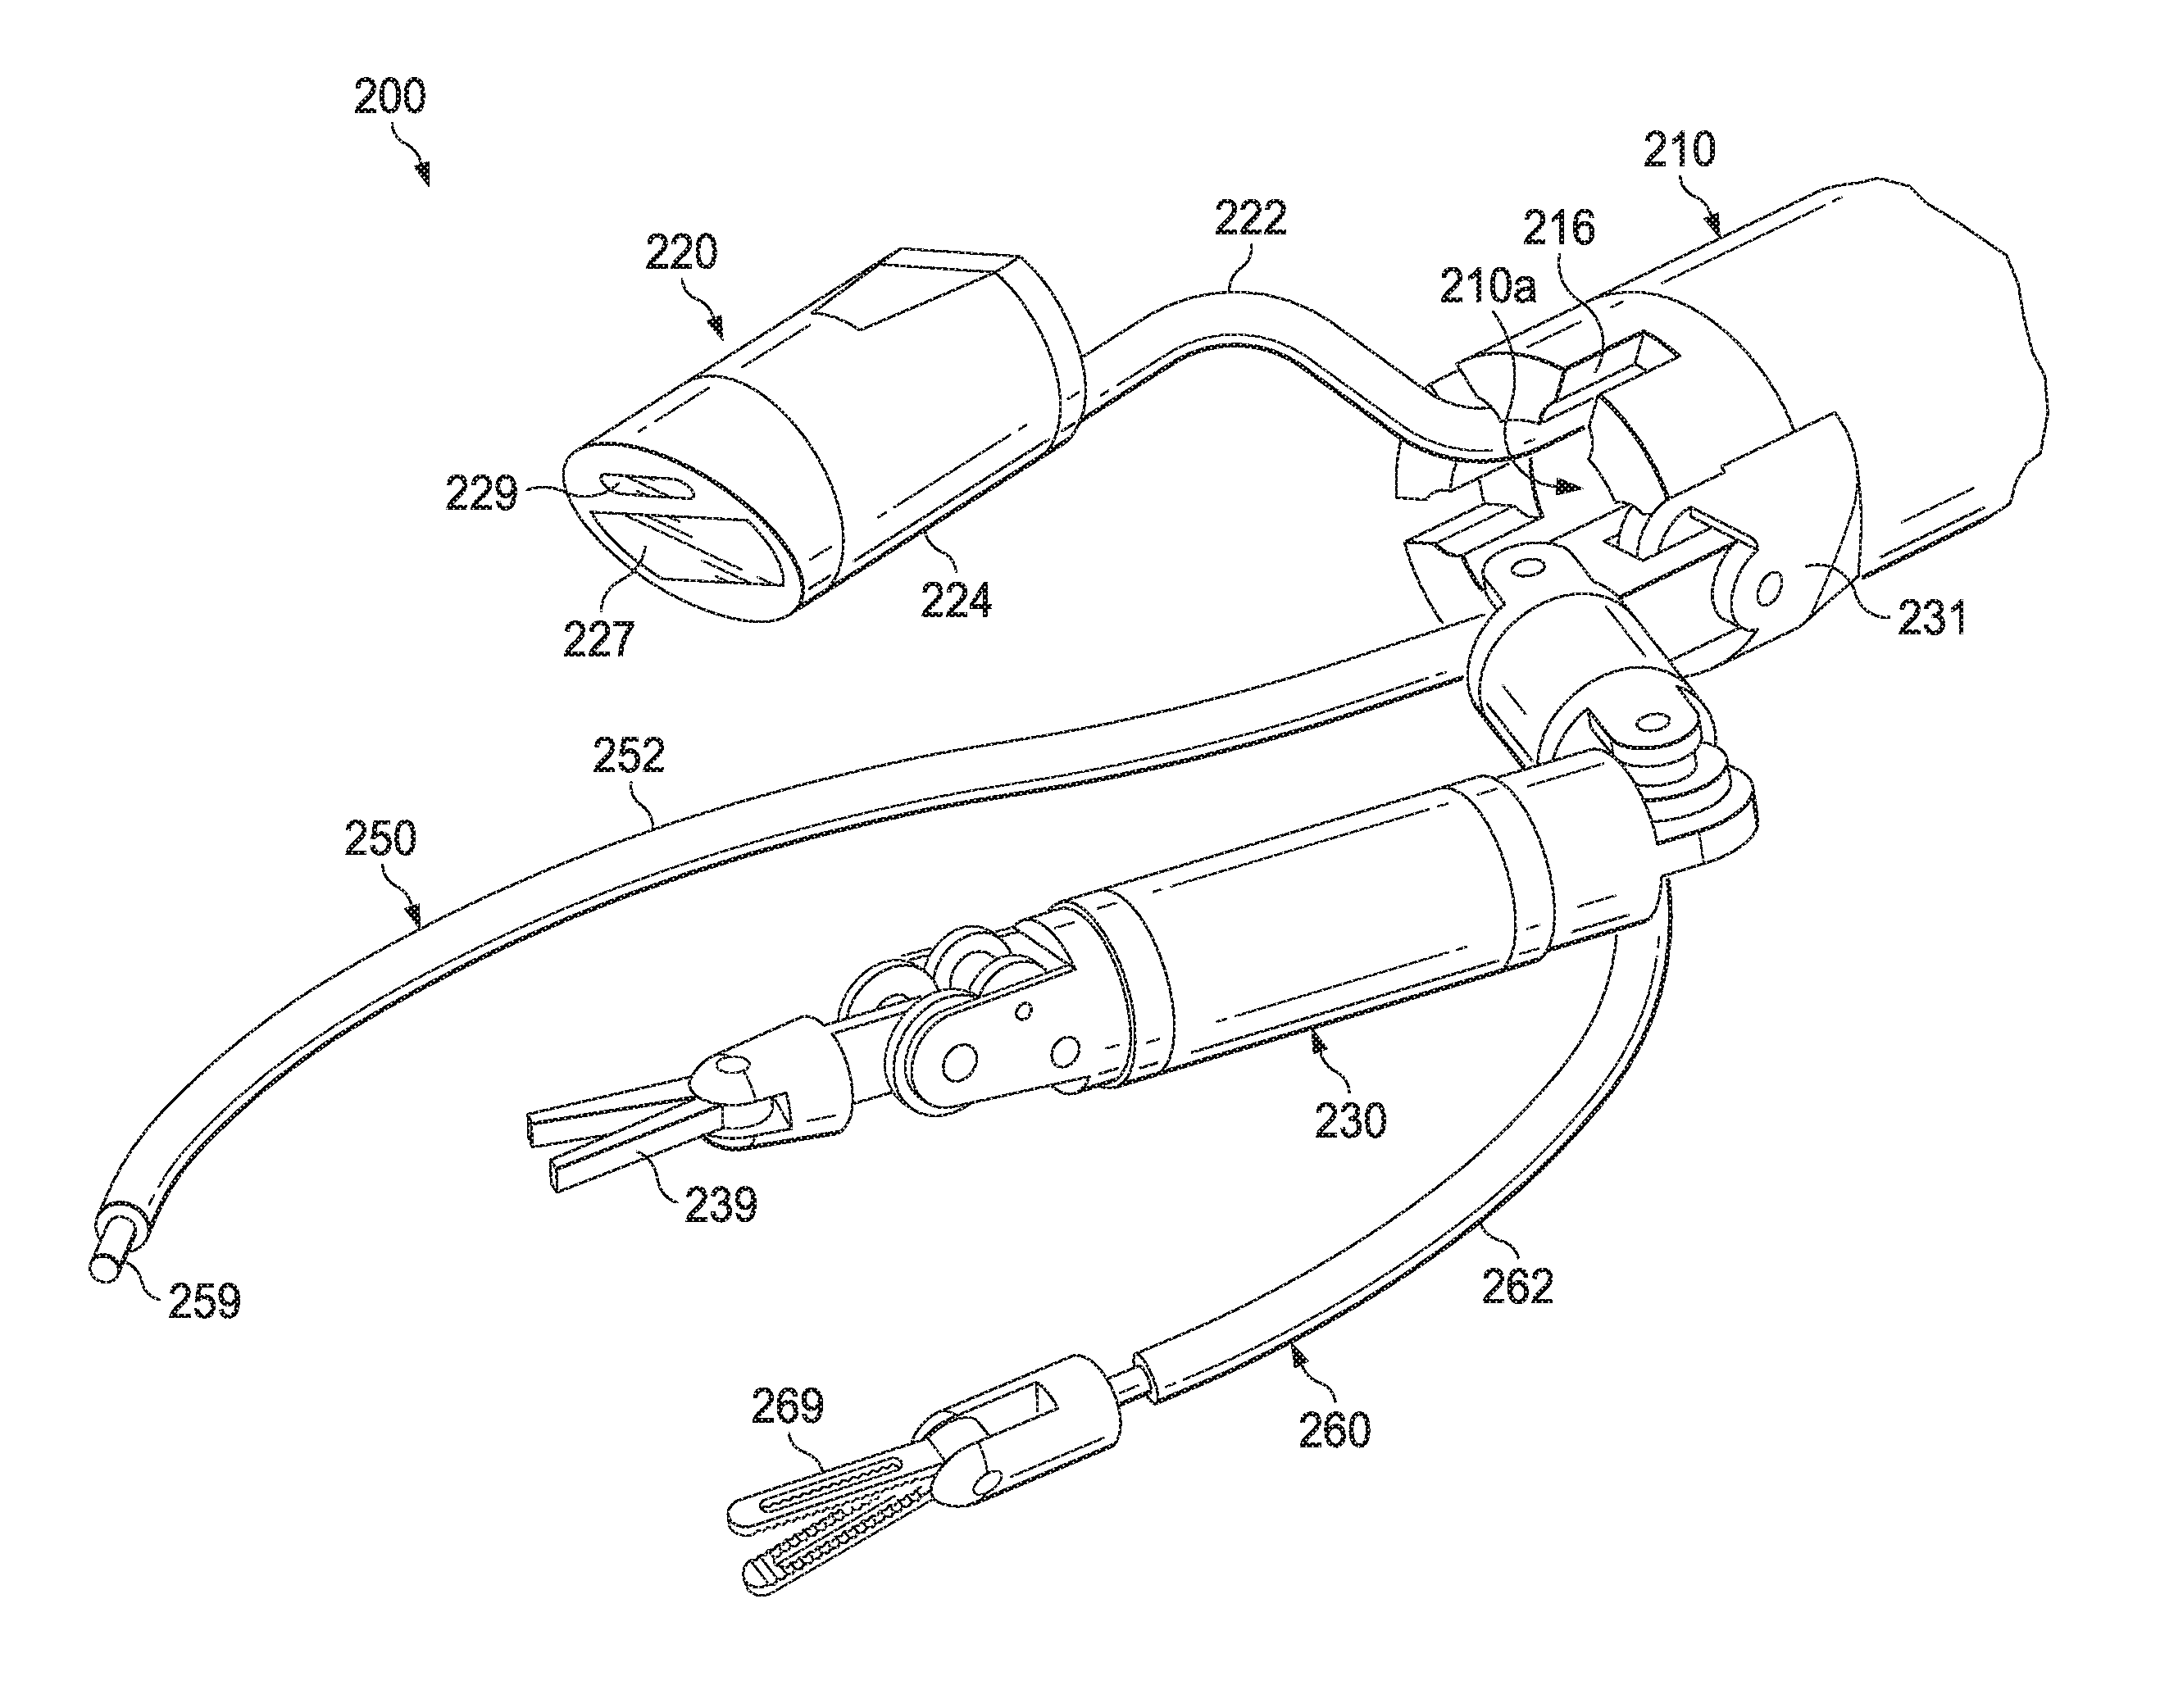 Robotic Devices and Systems for Performing Single Incision Procedures and Natural Orifice Translumenal Endoscopic Surgical Procedures, and Methods of Configuring Robotic Devices and Systems